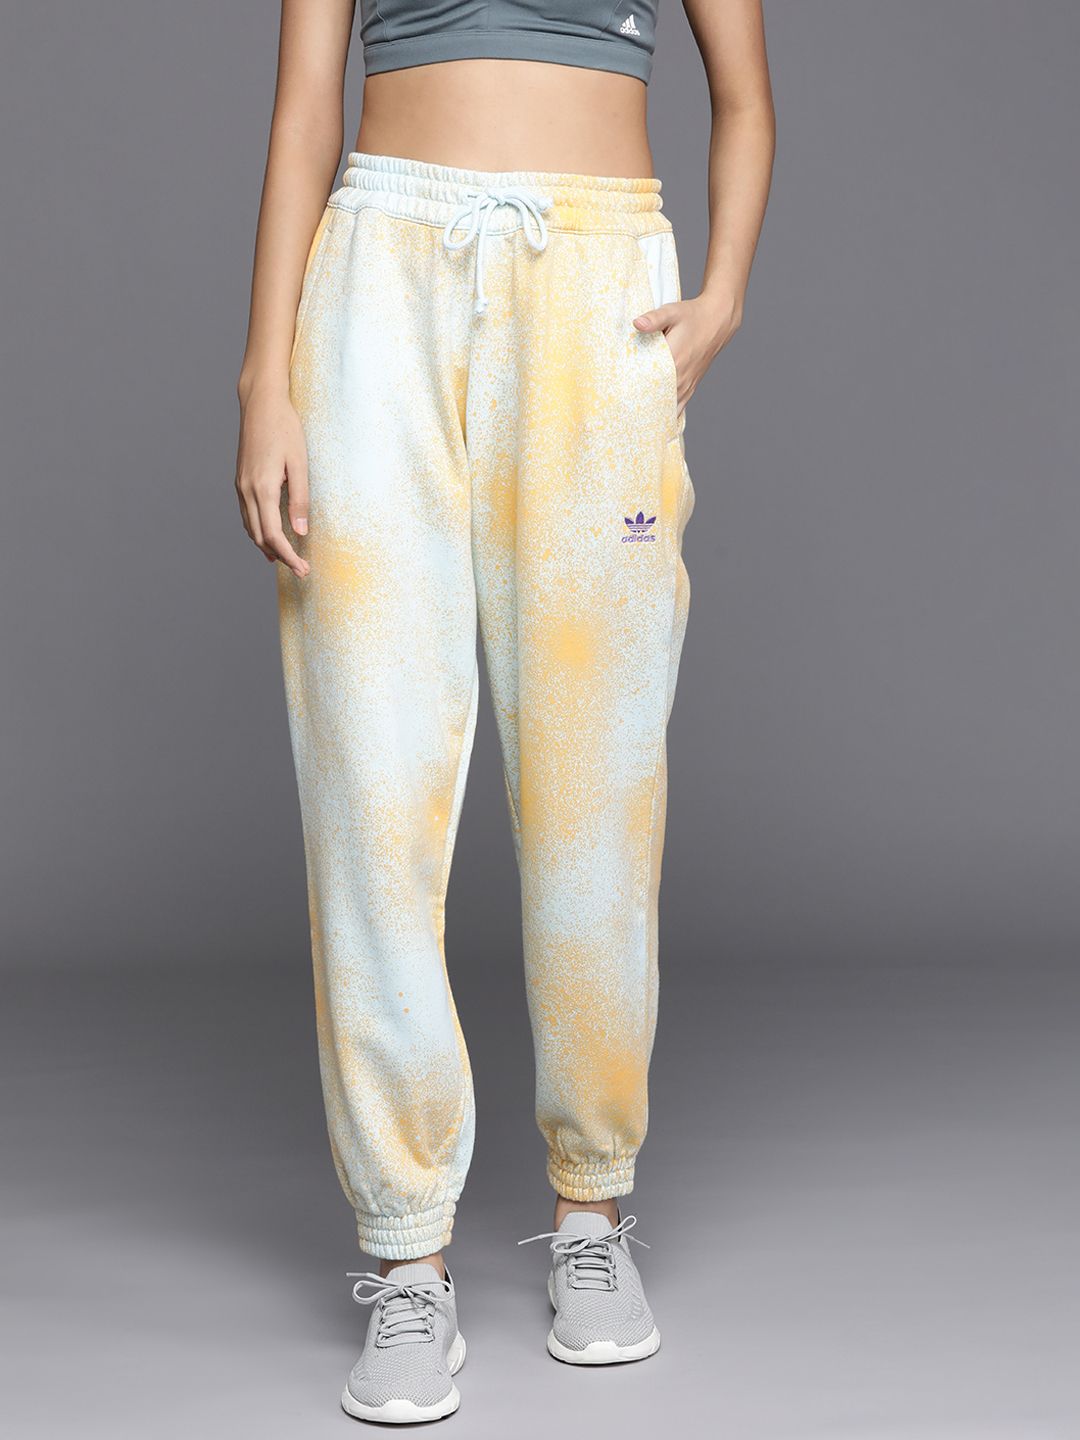 ADIDAS Originals Women Yellow & Blue Pure Cotton Printed Joggers Price in India